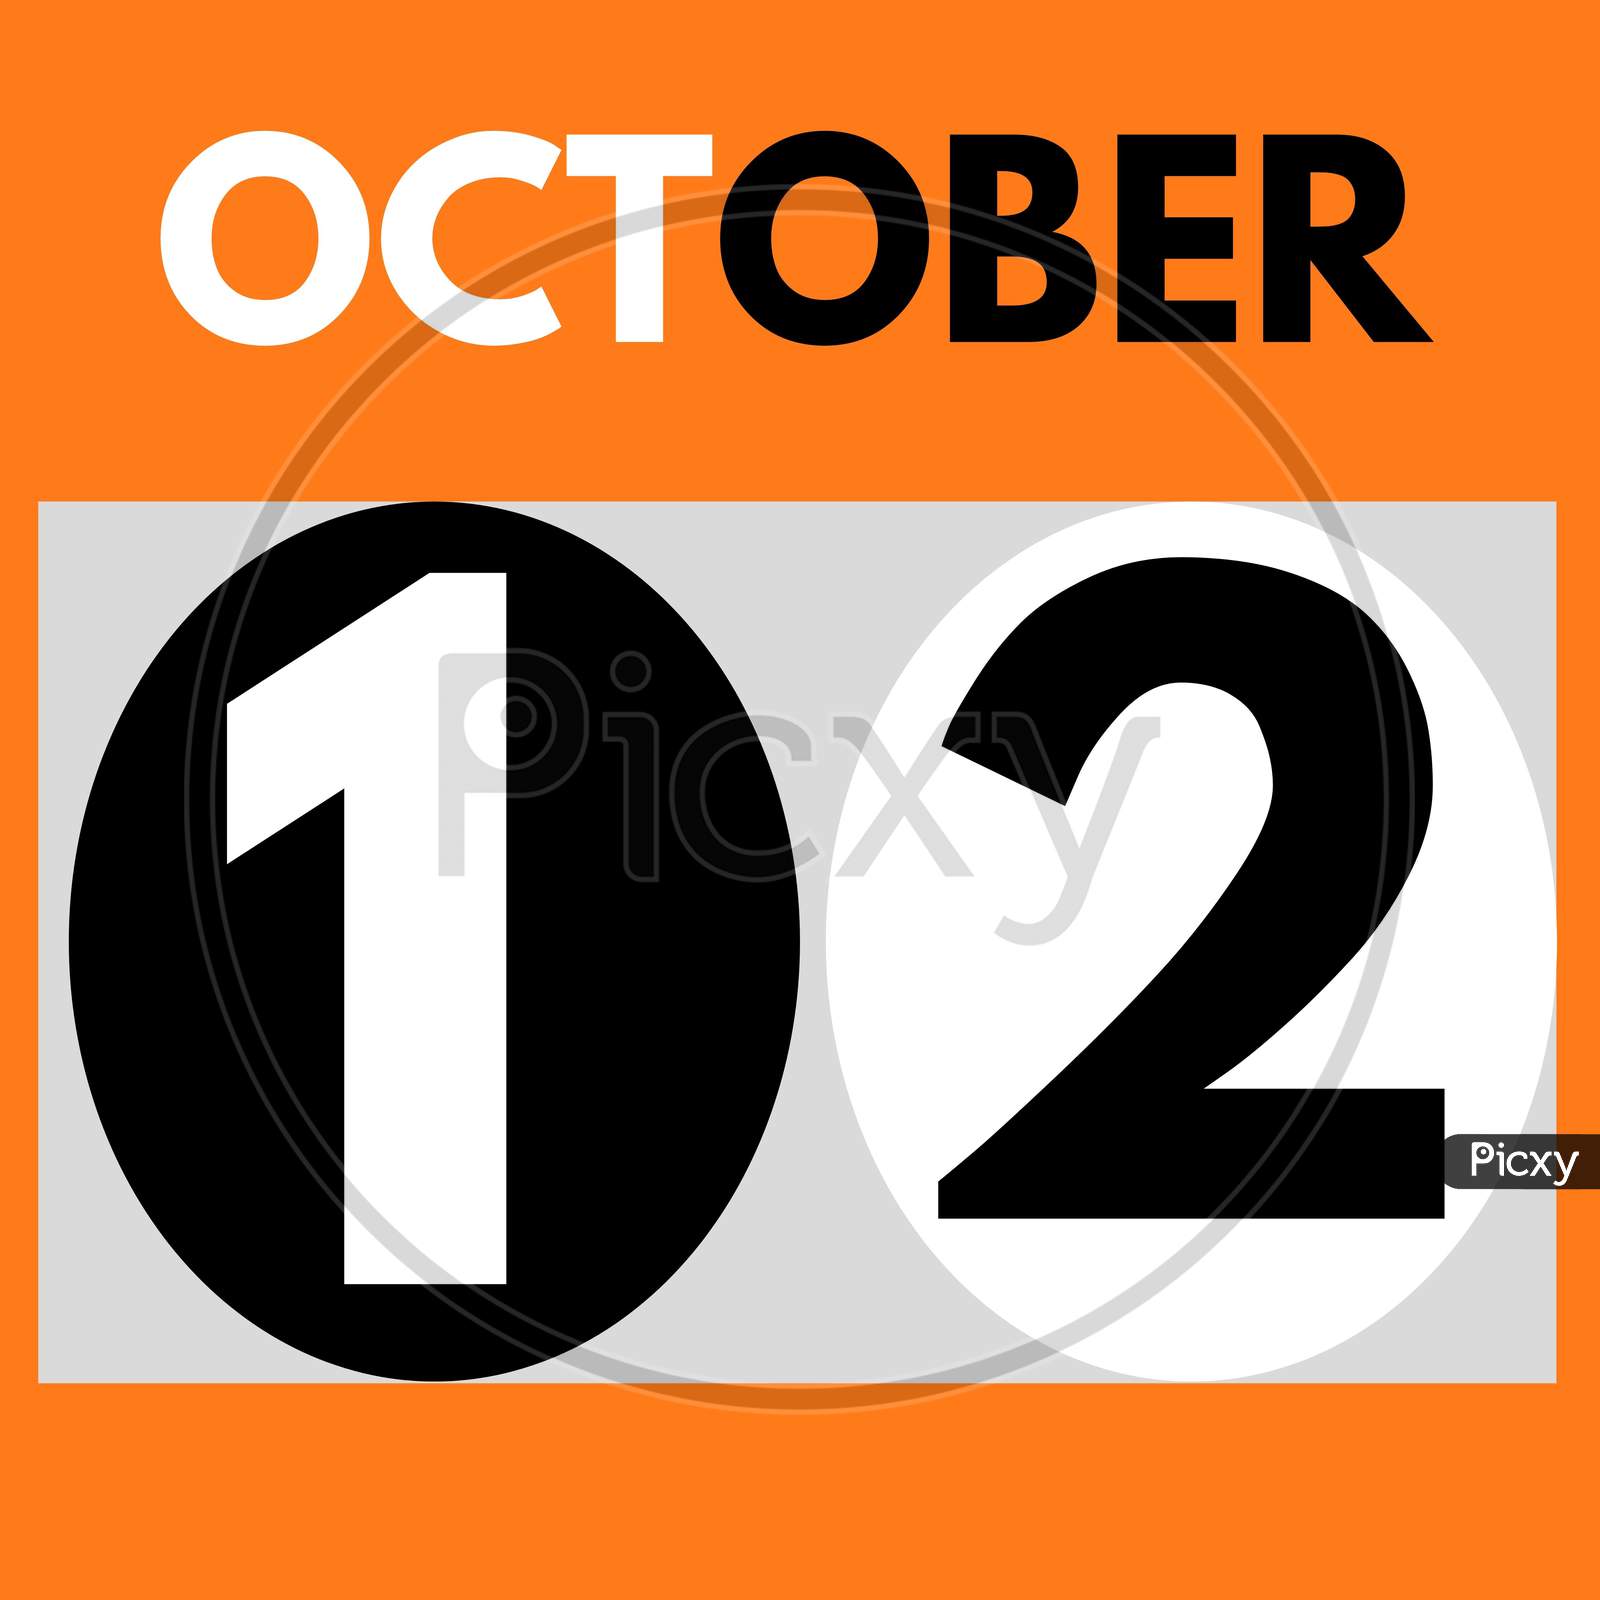 October 12 . Modern Daily Calendar Icon .Date ,Day, Month .Calendar For The Month Of October